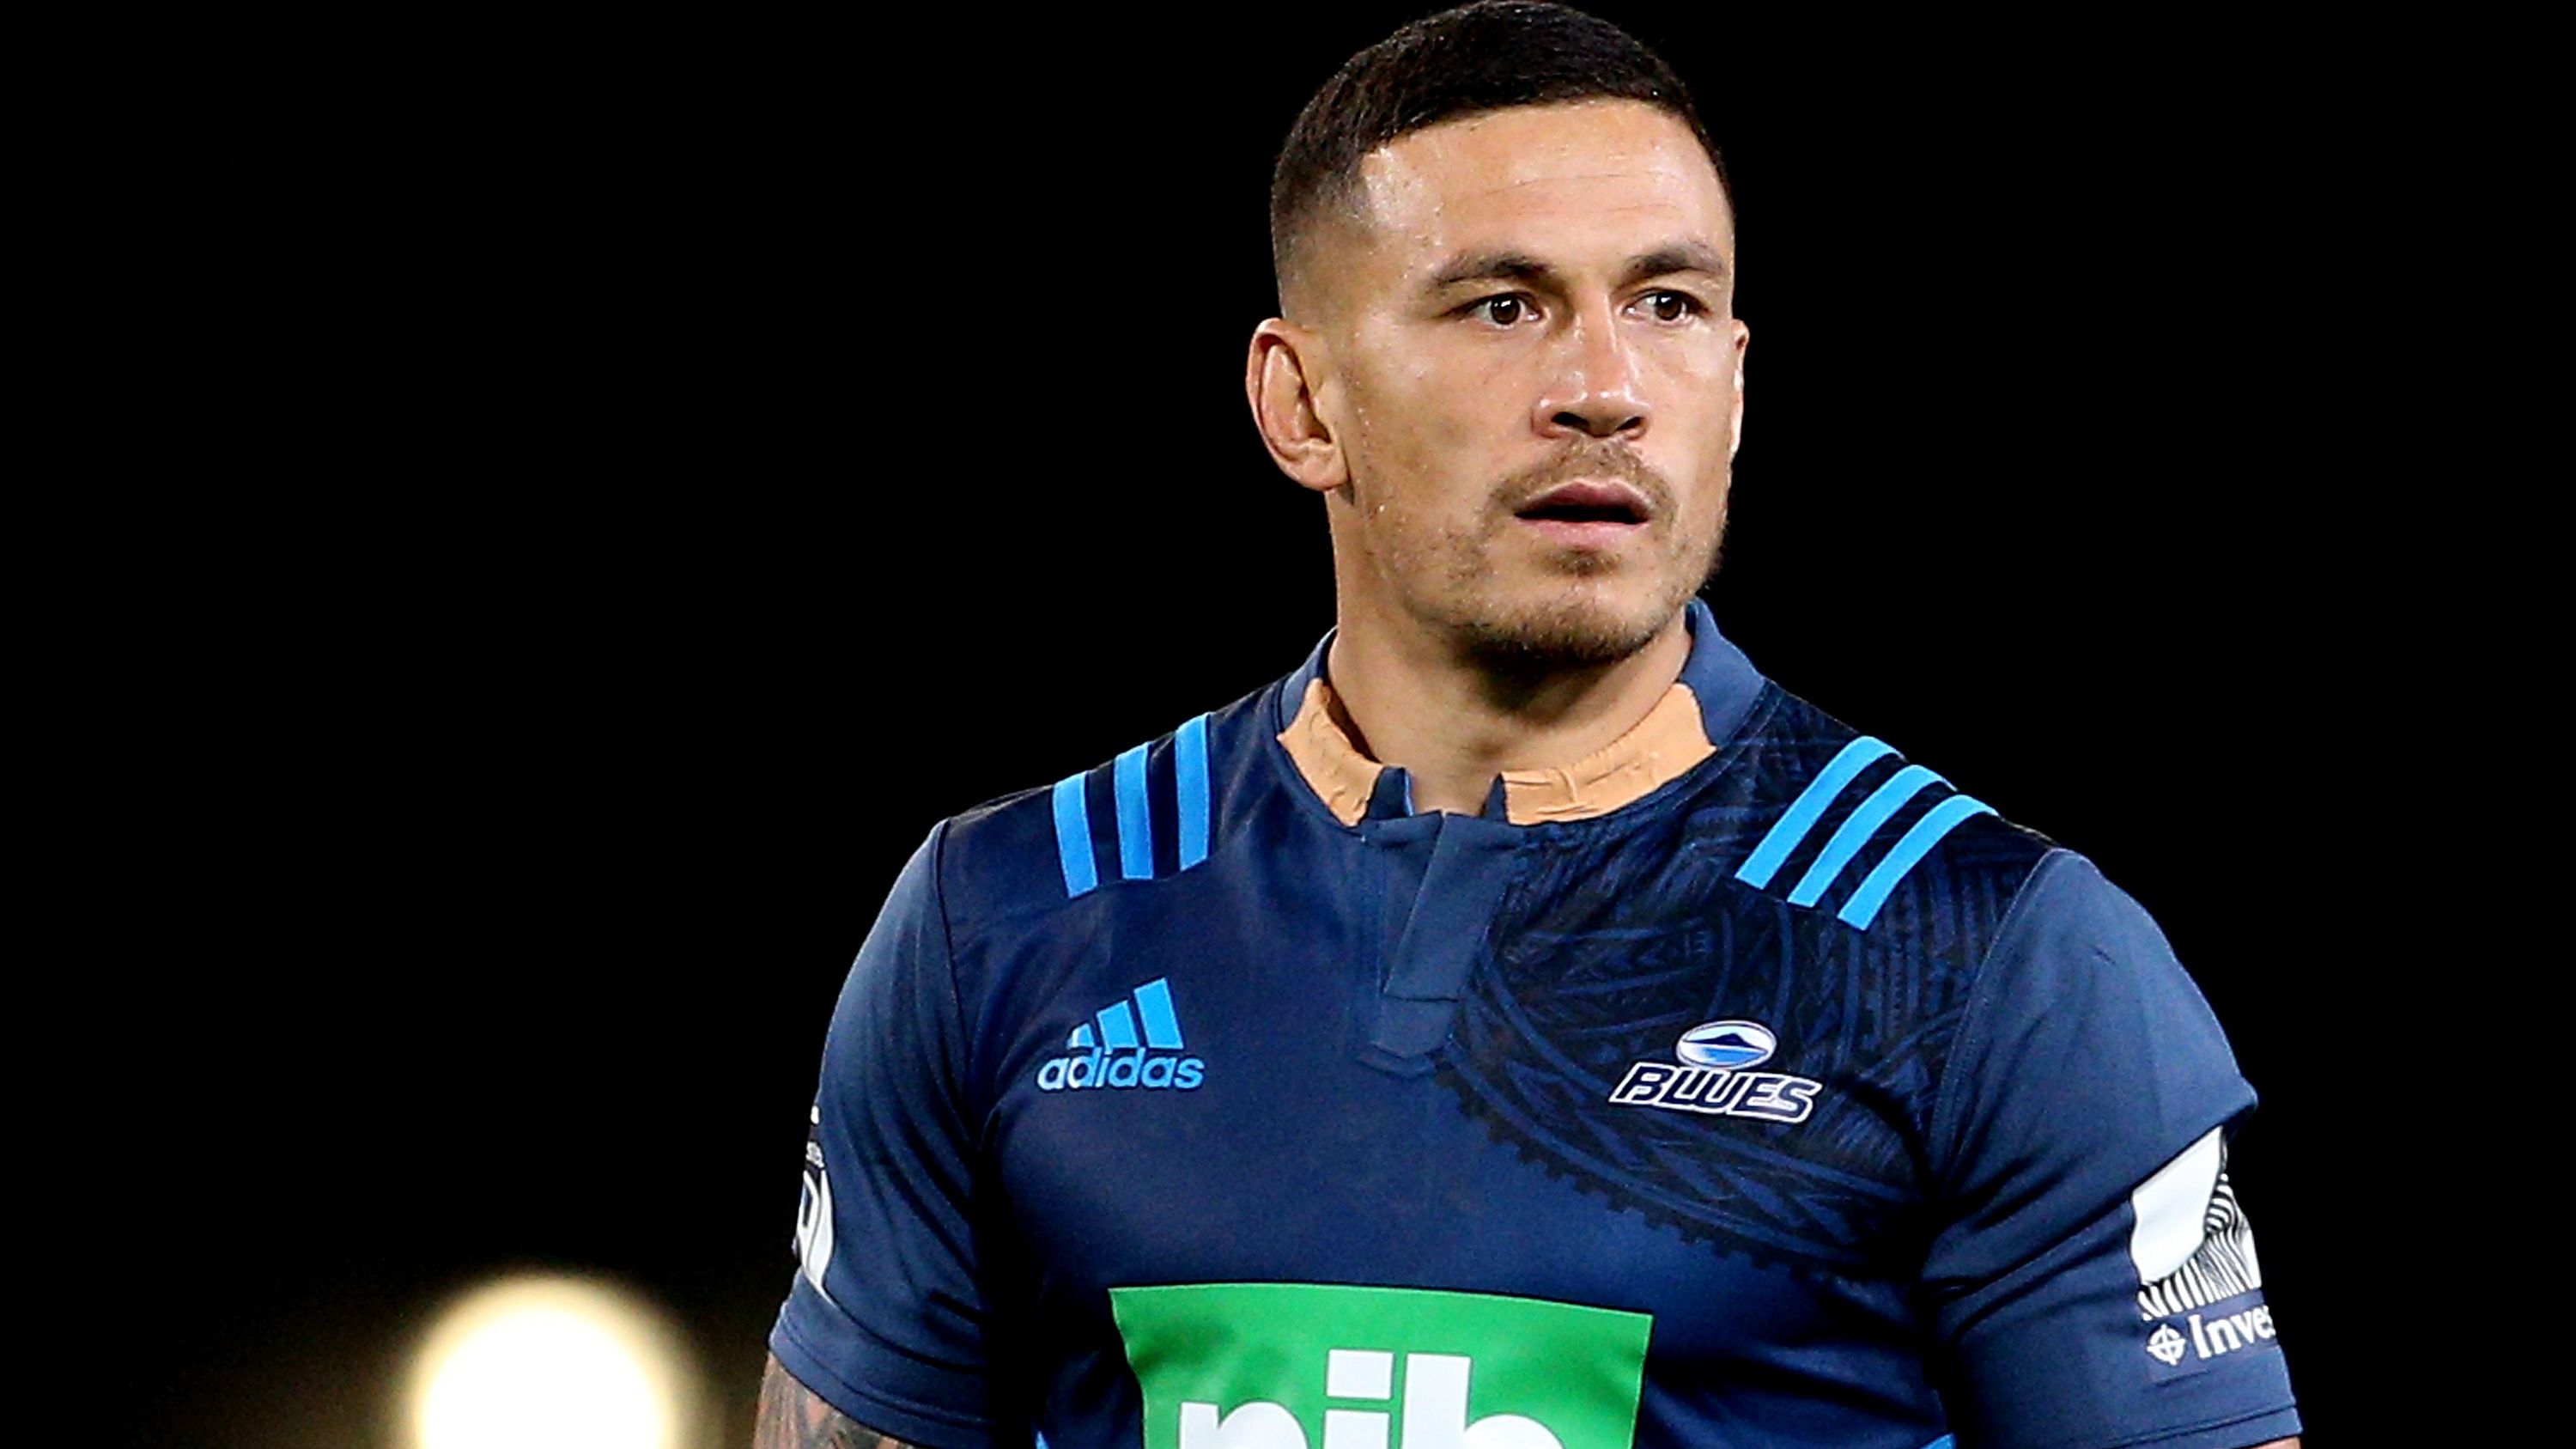 Sonny Bill Williams with tape covering the Bank of New Zealand logo on the collar of his Blues jersey in 2017.